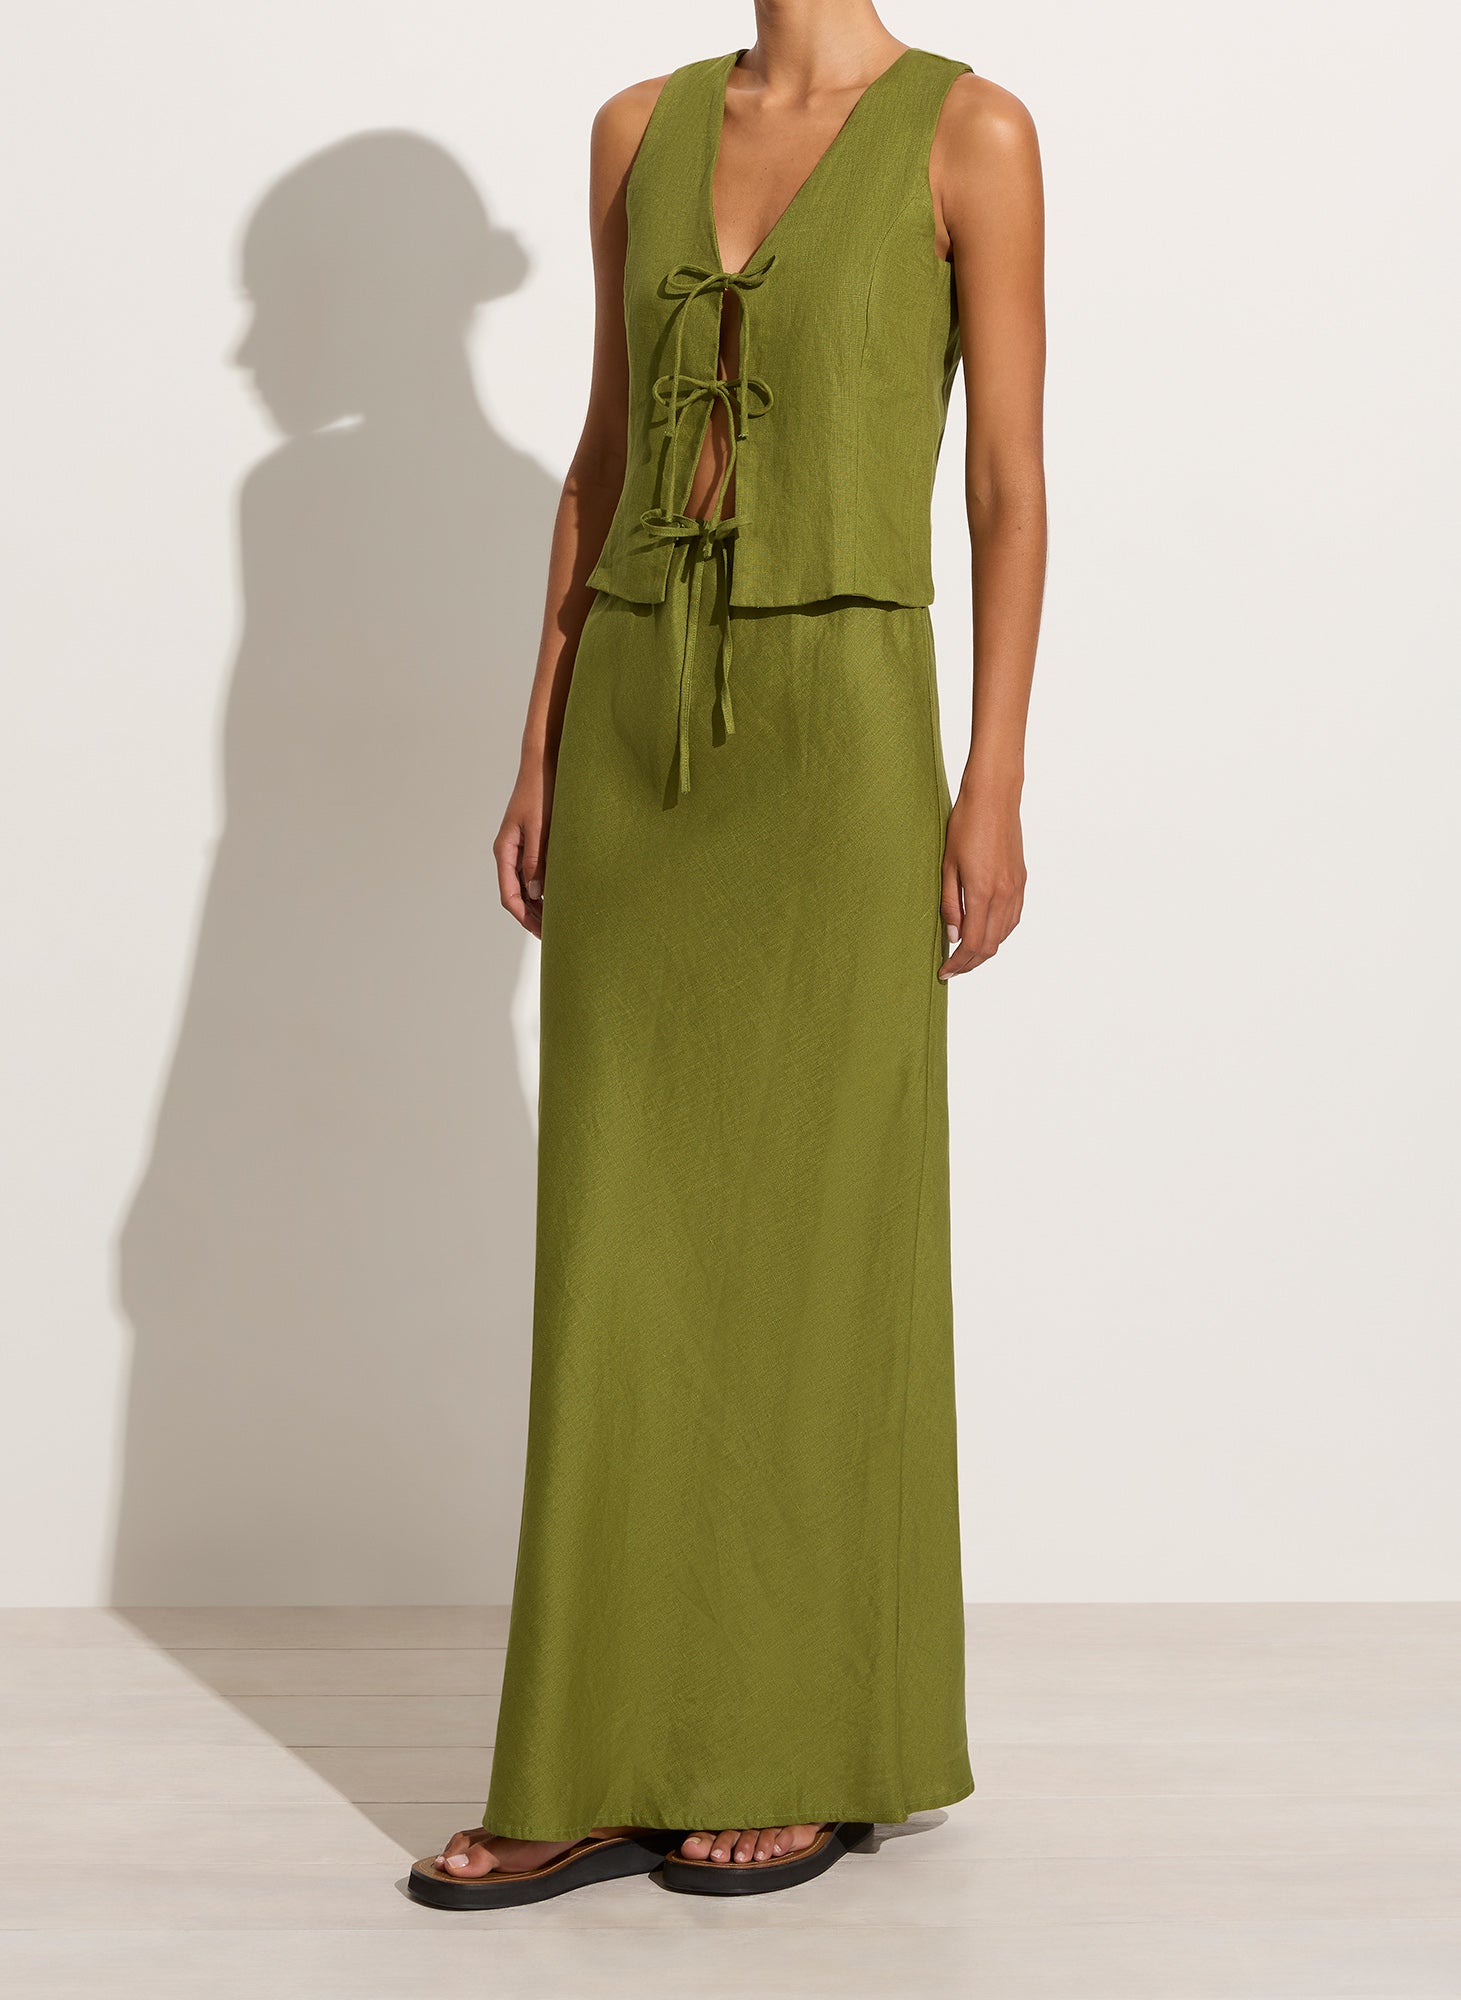 Faithfull The Brand Cataline Skirt in Palm Green available at TNT The New Trend Australia